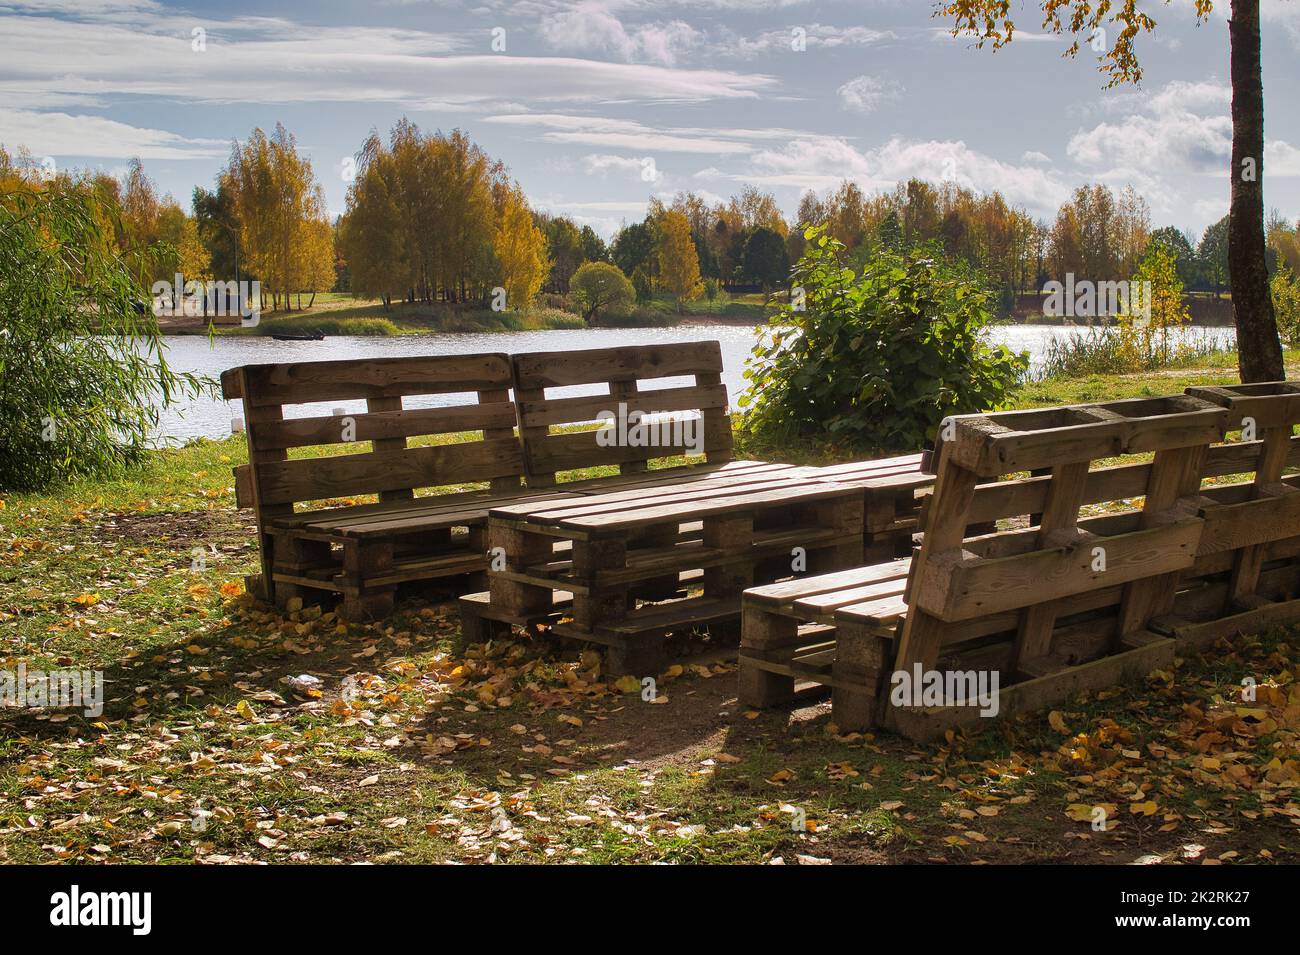 Outdoor furniture made from wood pallets Stock Photo